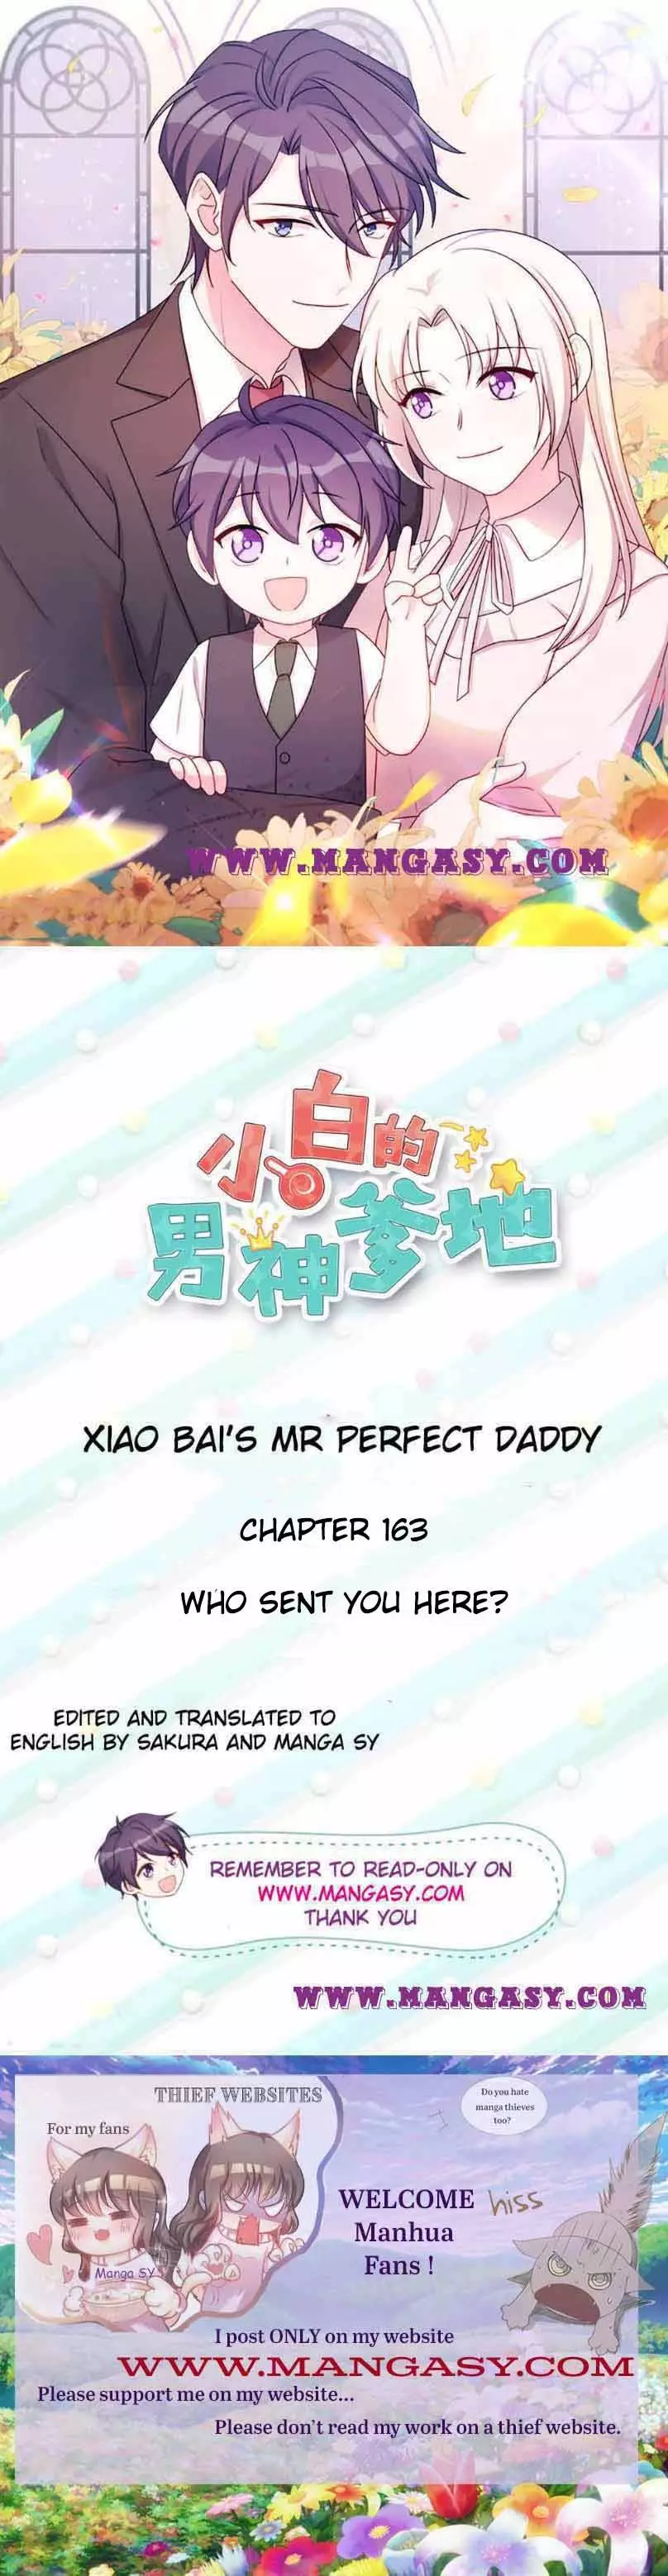 Xiao Bai’S Father Is A Wonderful Person - 163 page 1-70b8a19f